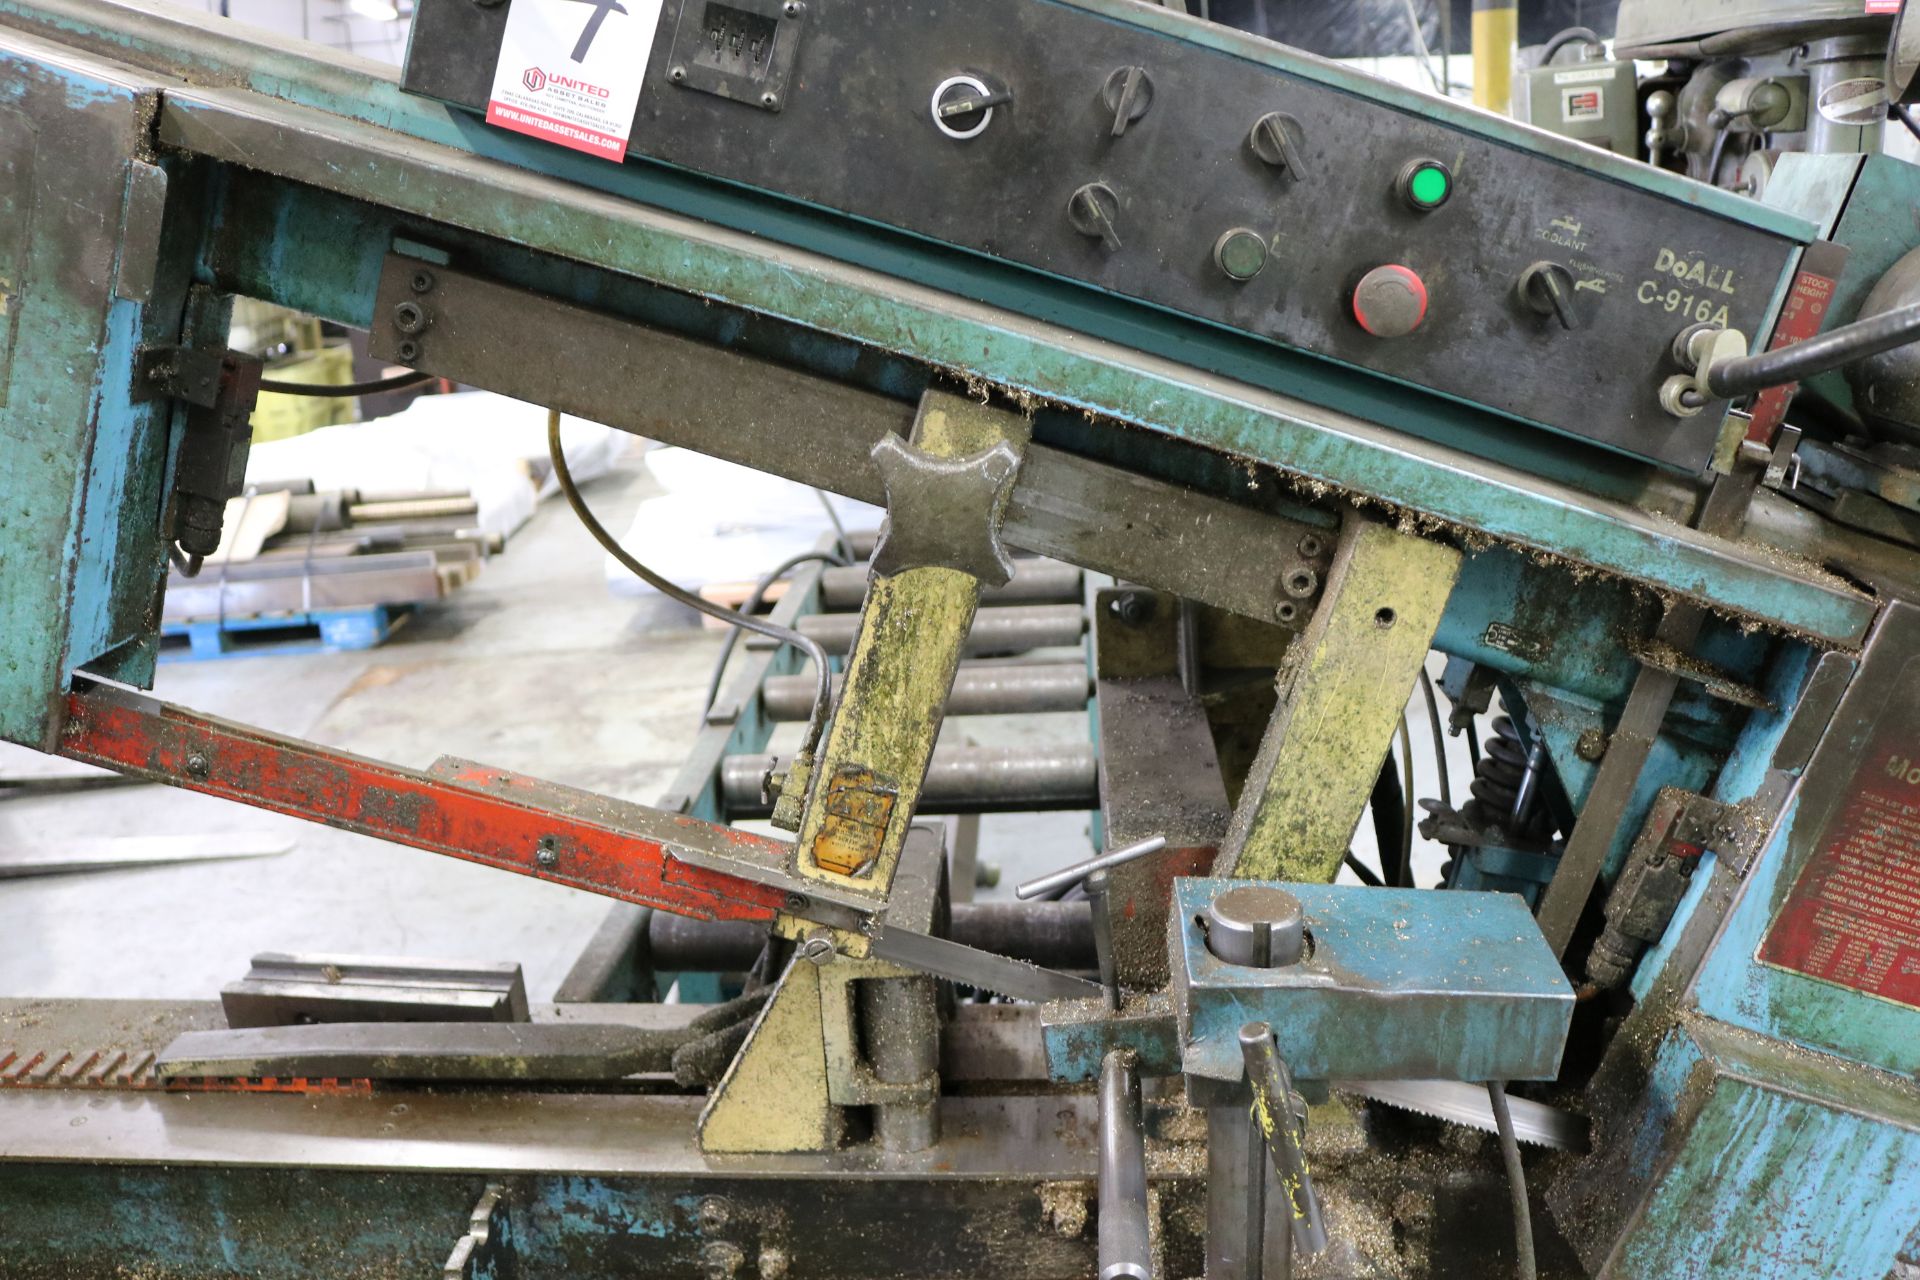 DOALL HORIZONTAL BAND SAW, MODEL C916A, 9" X 16" CAPACITY, X/N 502-93221, W/ OUT FEED CONVEYOR - Image 2 of 6